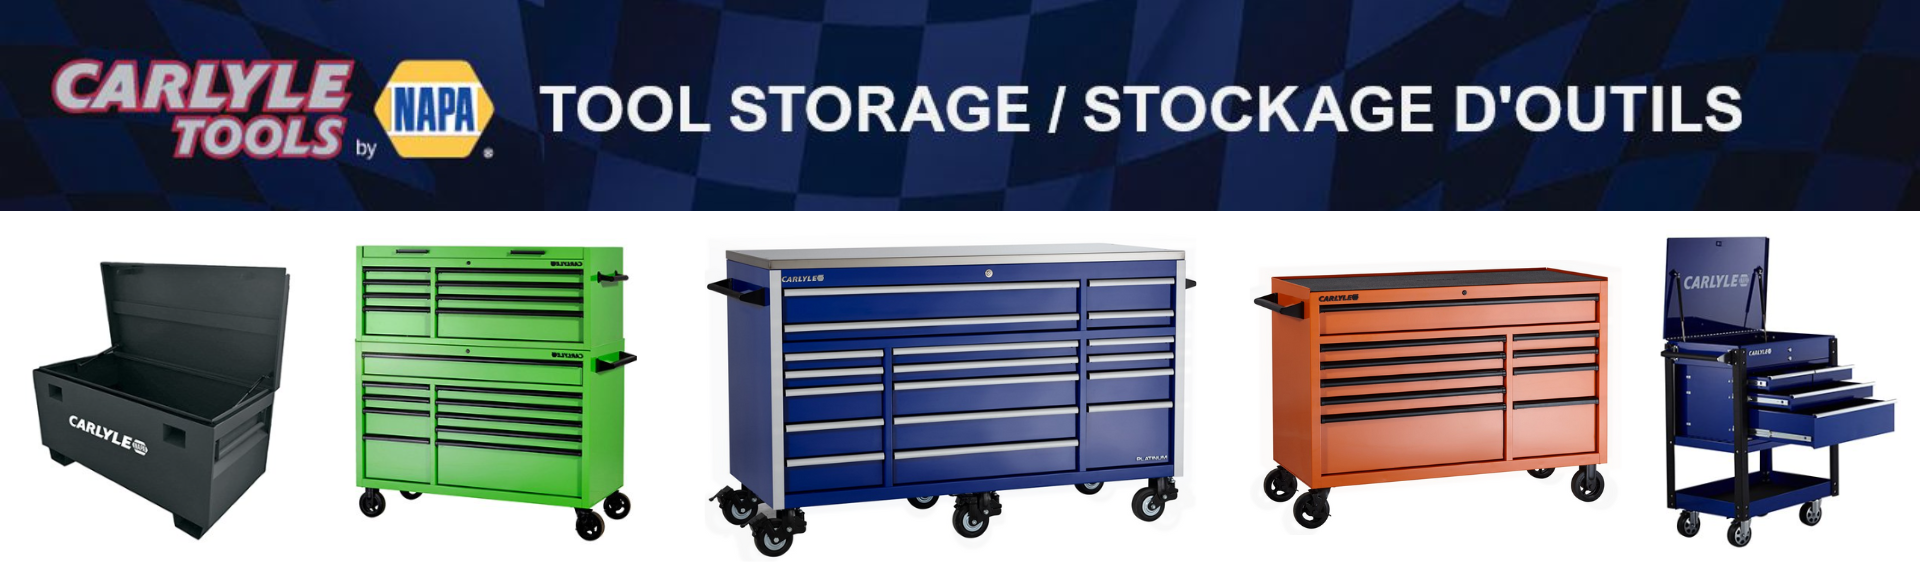 Carlyle Tool Storage Solution